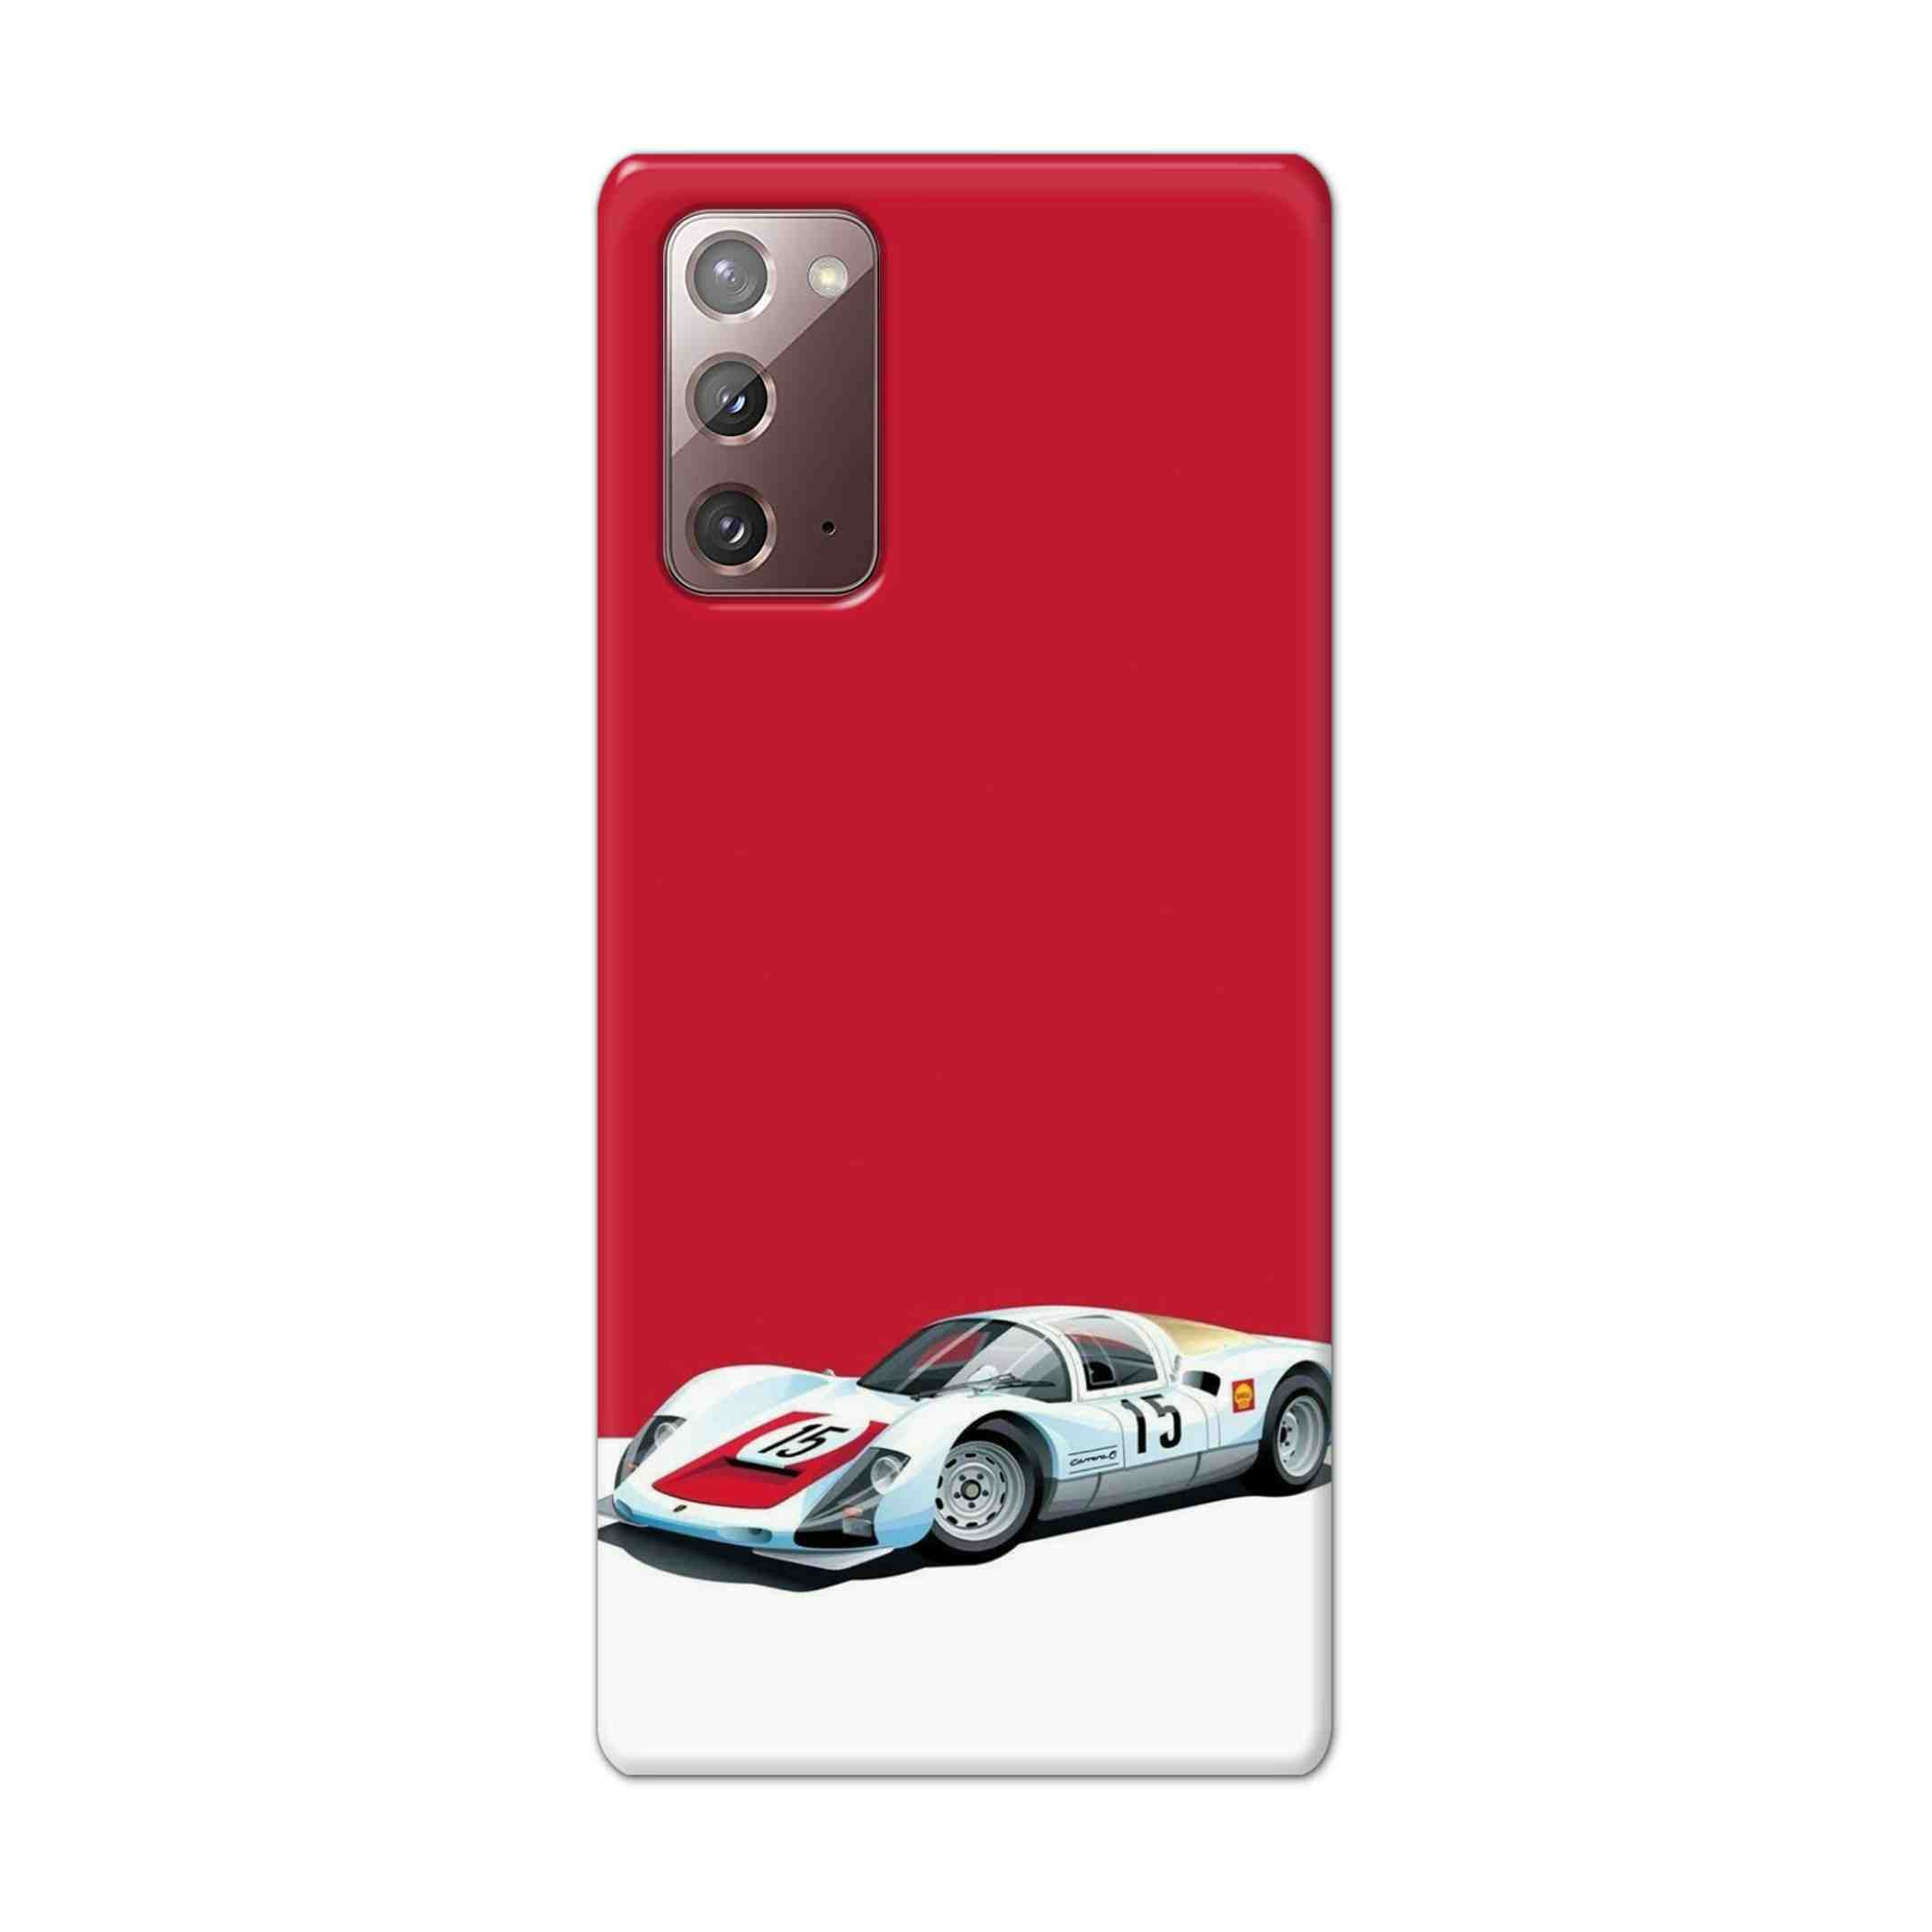 Buy Ferrari F15 Hard Back Mobile Phone Case Cover For Samsung Galaxy Note 20 Online